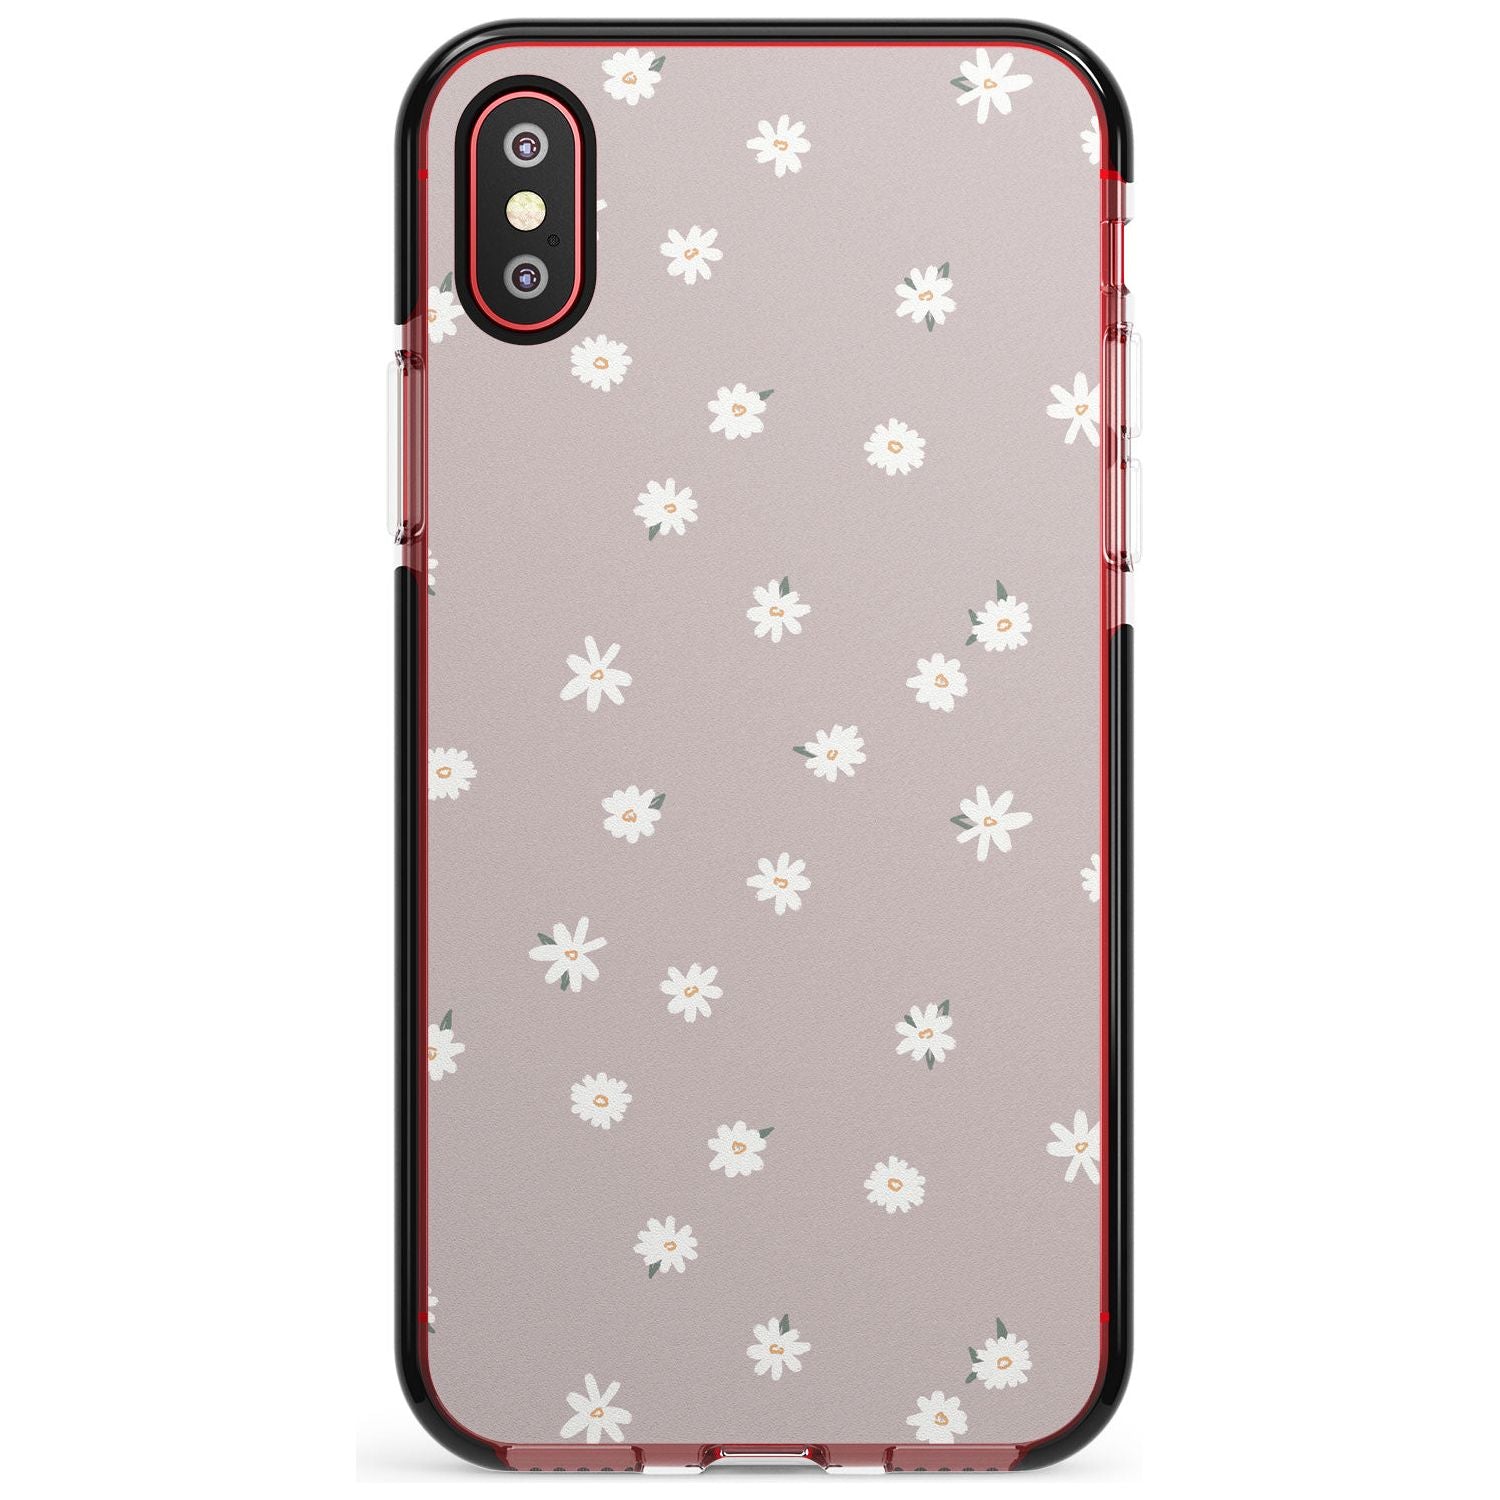 Painted Daises - Dark Pink Cute Floral Design Pink Fade Impact Phone Case for iPhone X XS Max XR